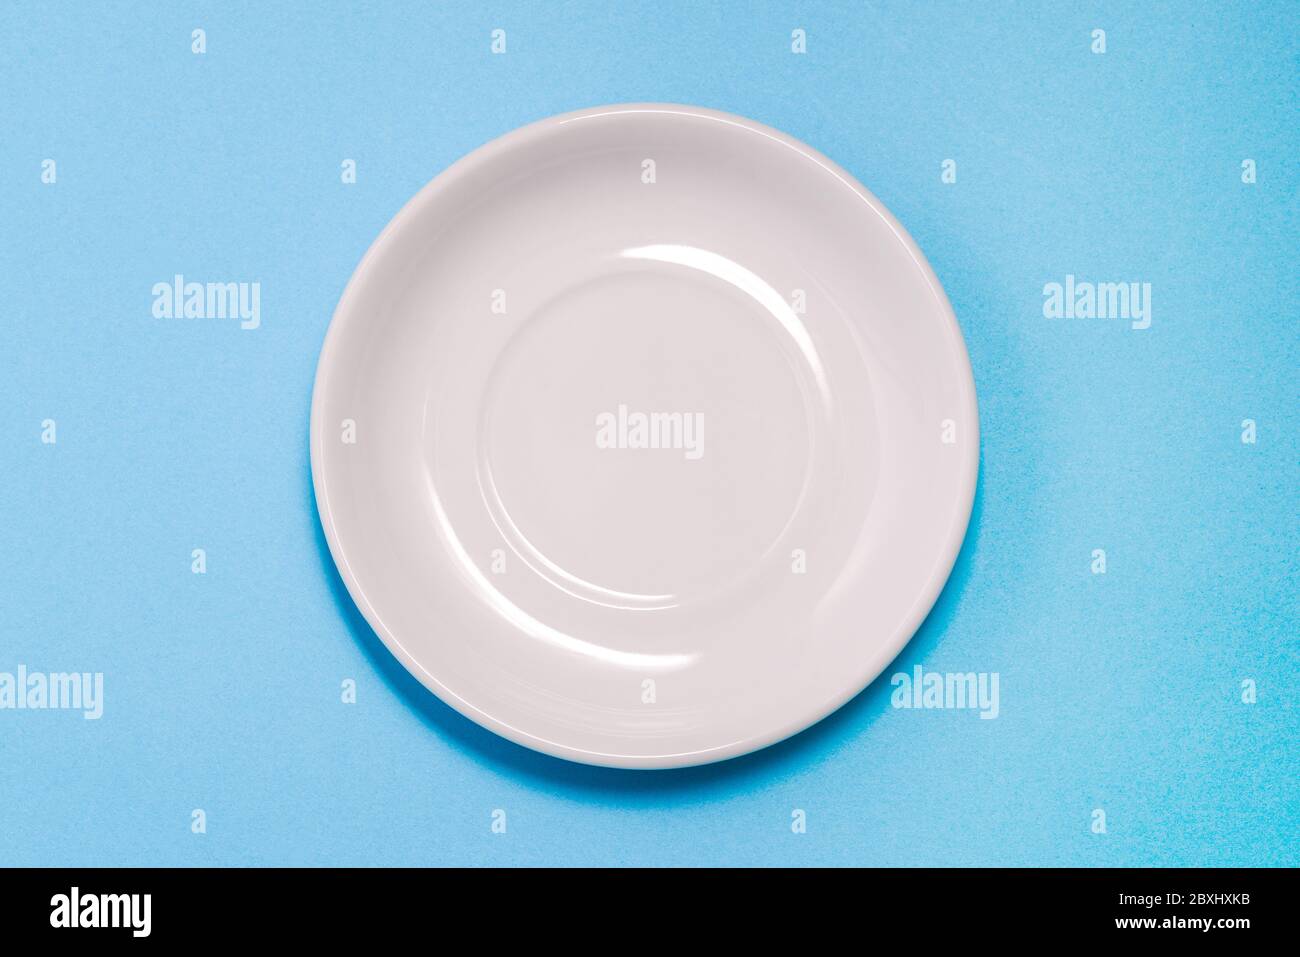 An empty white plate on a blue background. Clean dishes for Breakfast, dinner or lunch. Kitchen items. A top view of a flat layout. Stock Photo